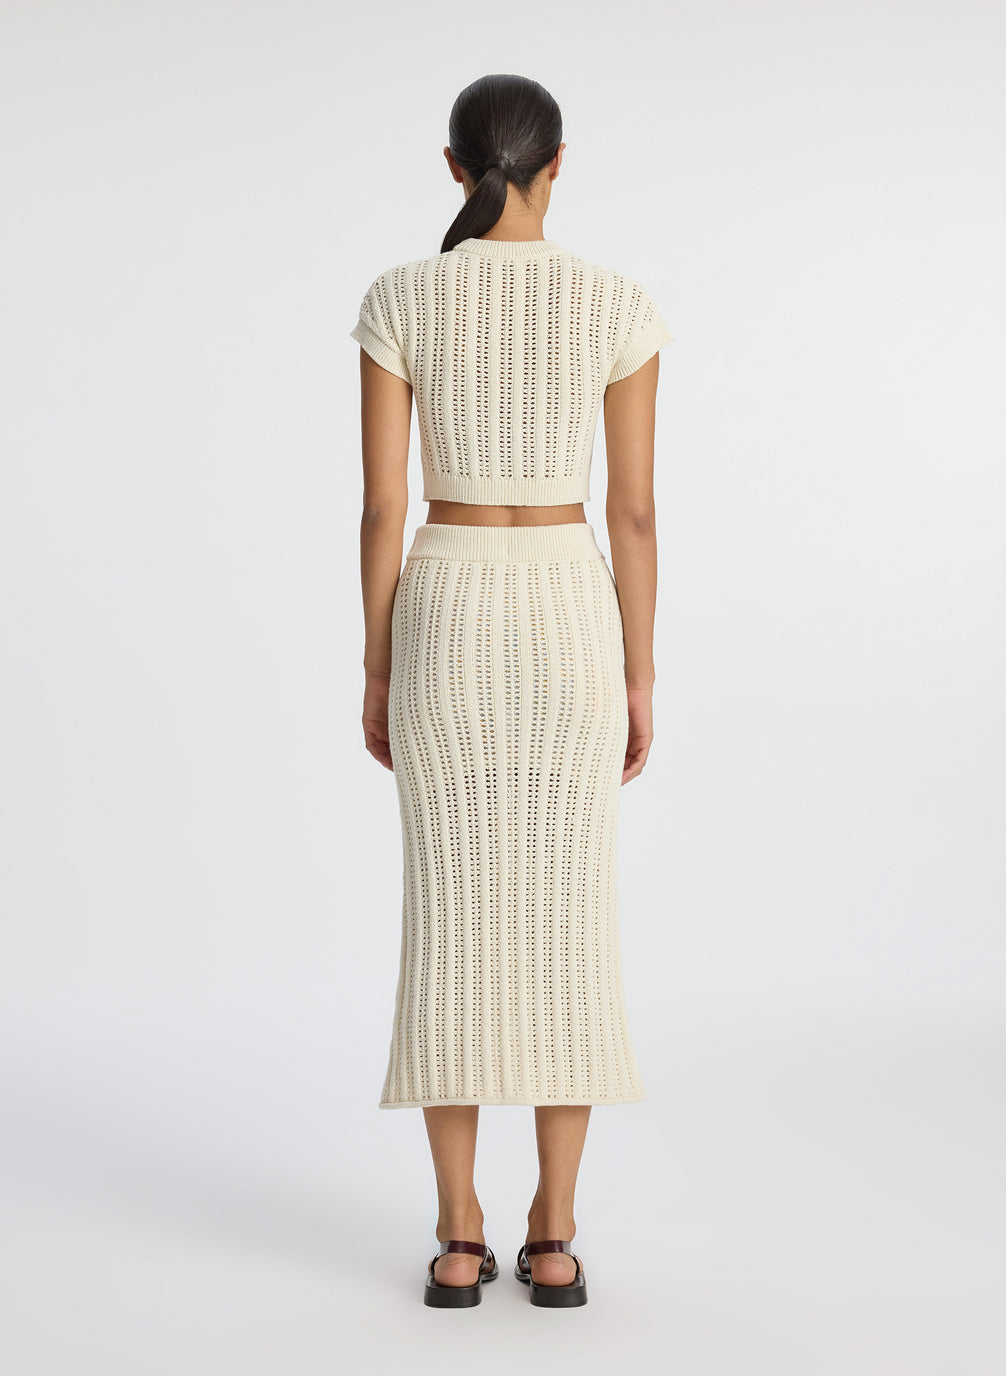 back view of woman wearing cream open weave cropped top and and matching midi skirt